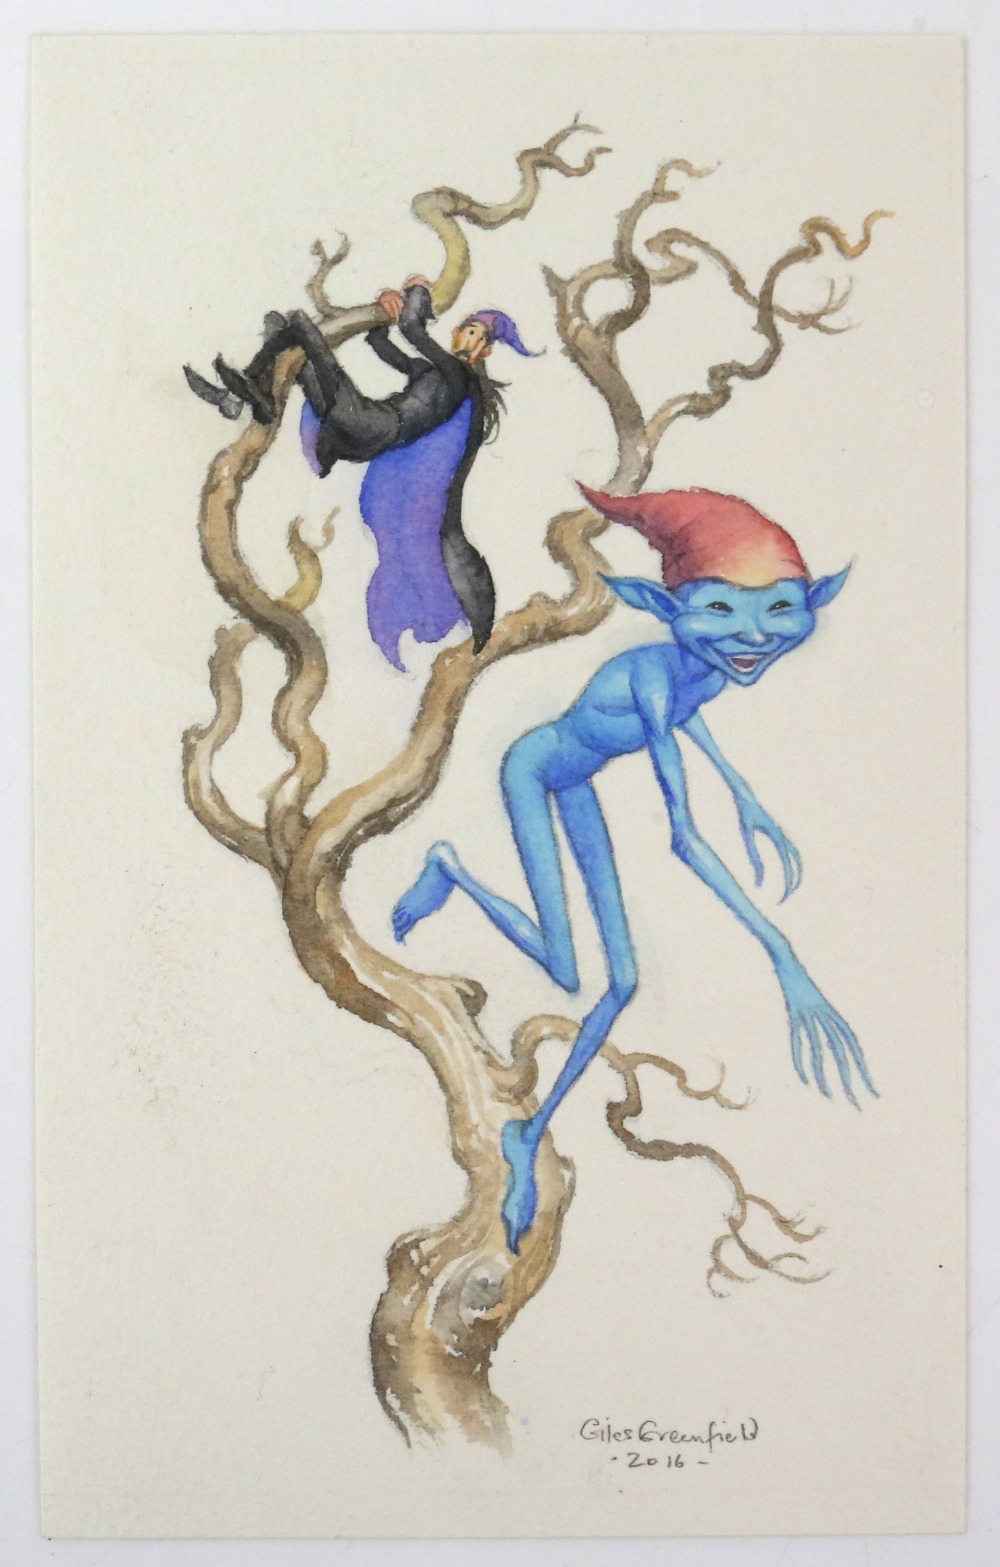 Fantastic Beasts and Where to Find Them (2016) Original Giles Greenfield watercolour 'Pixie' from